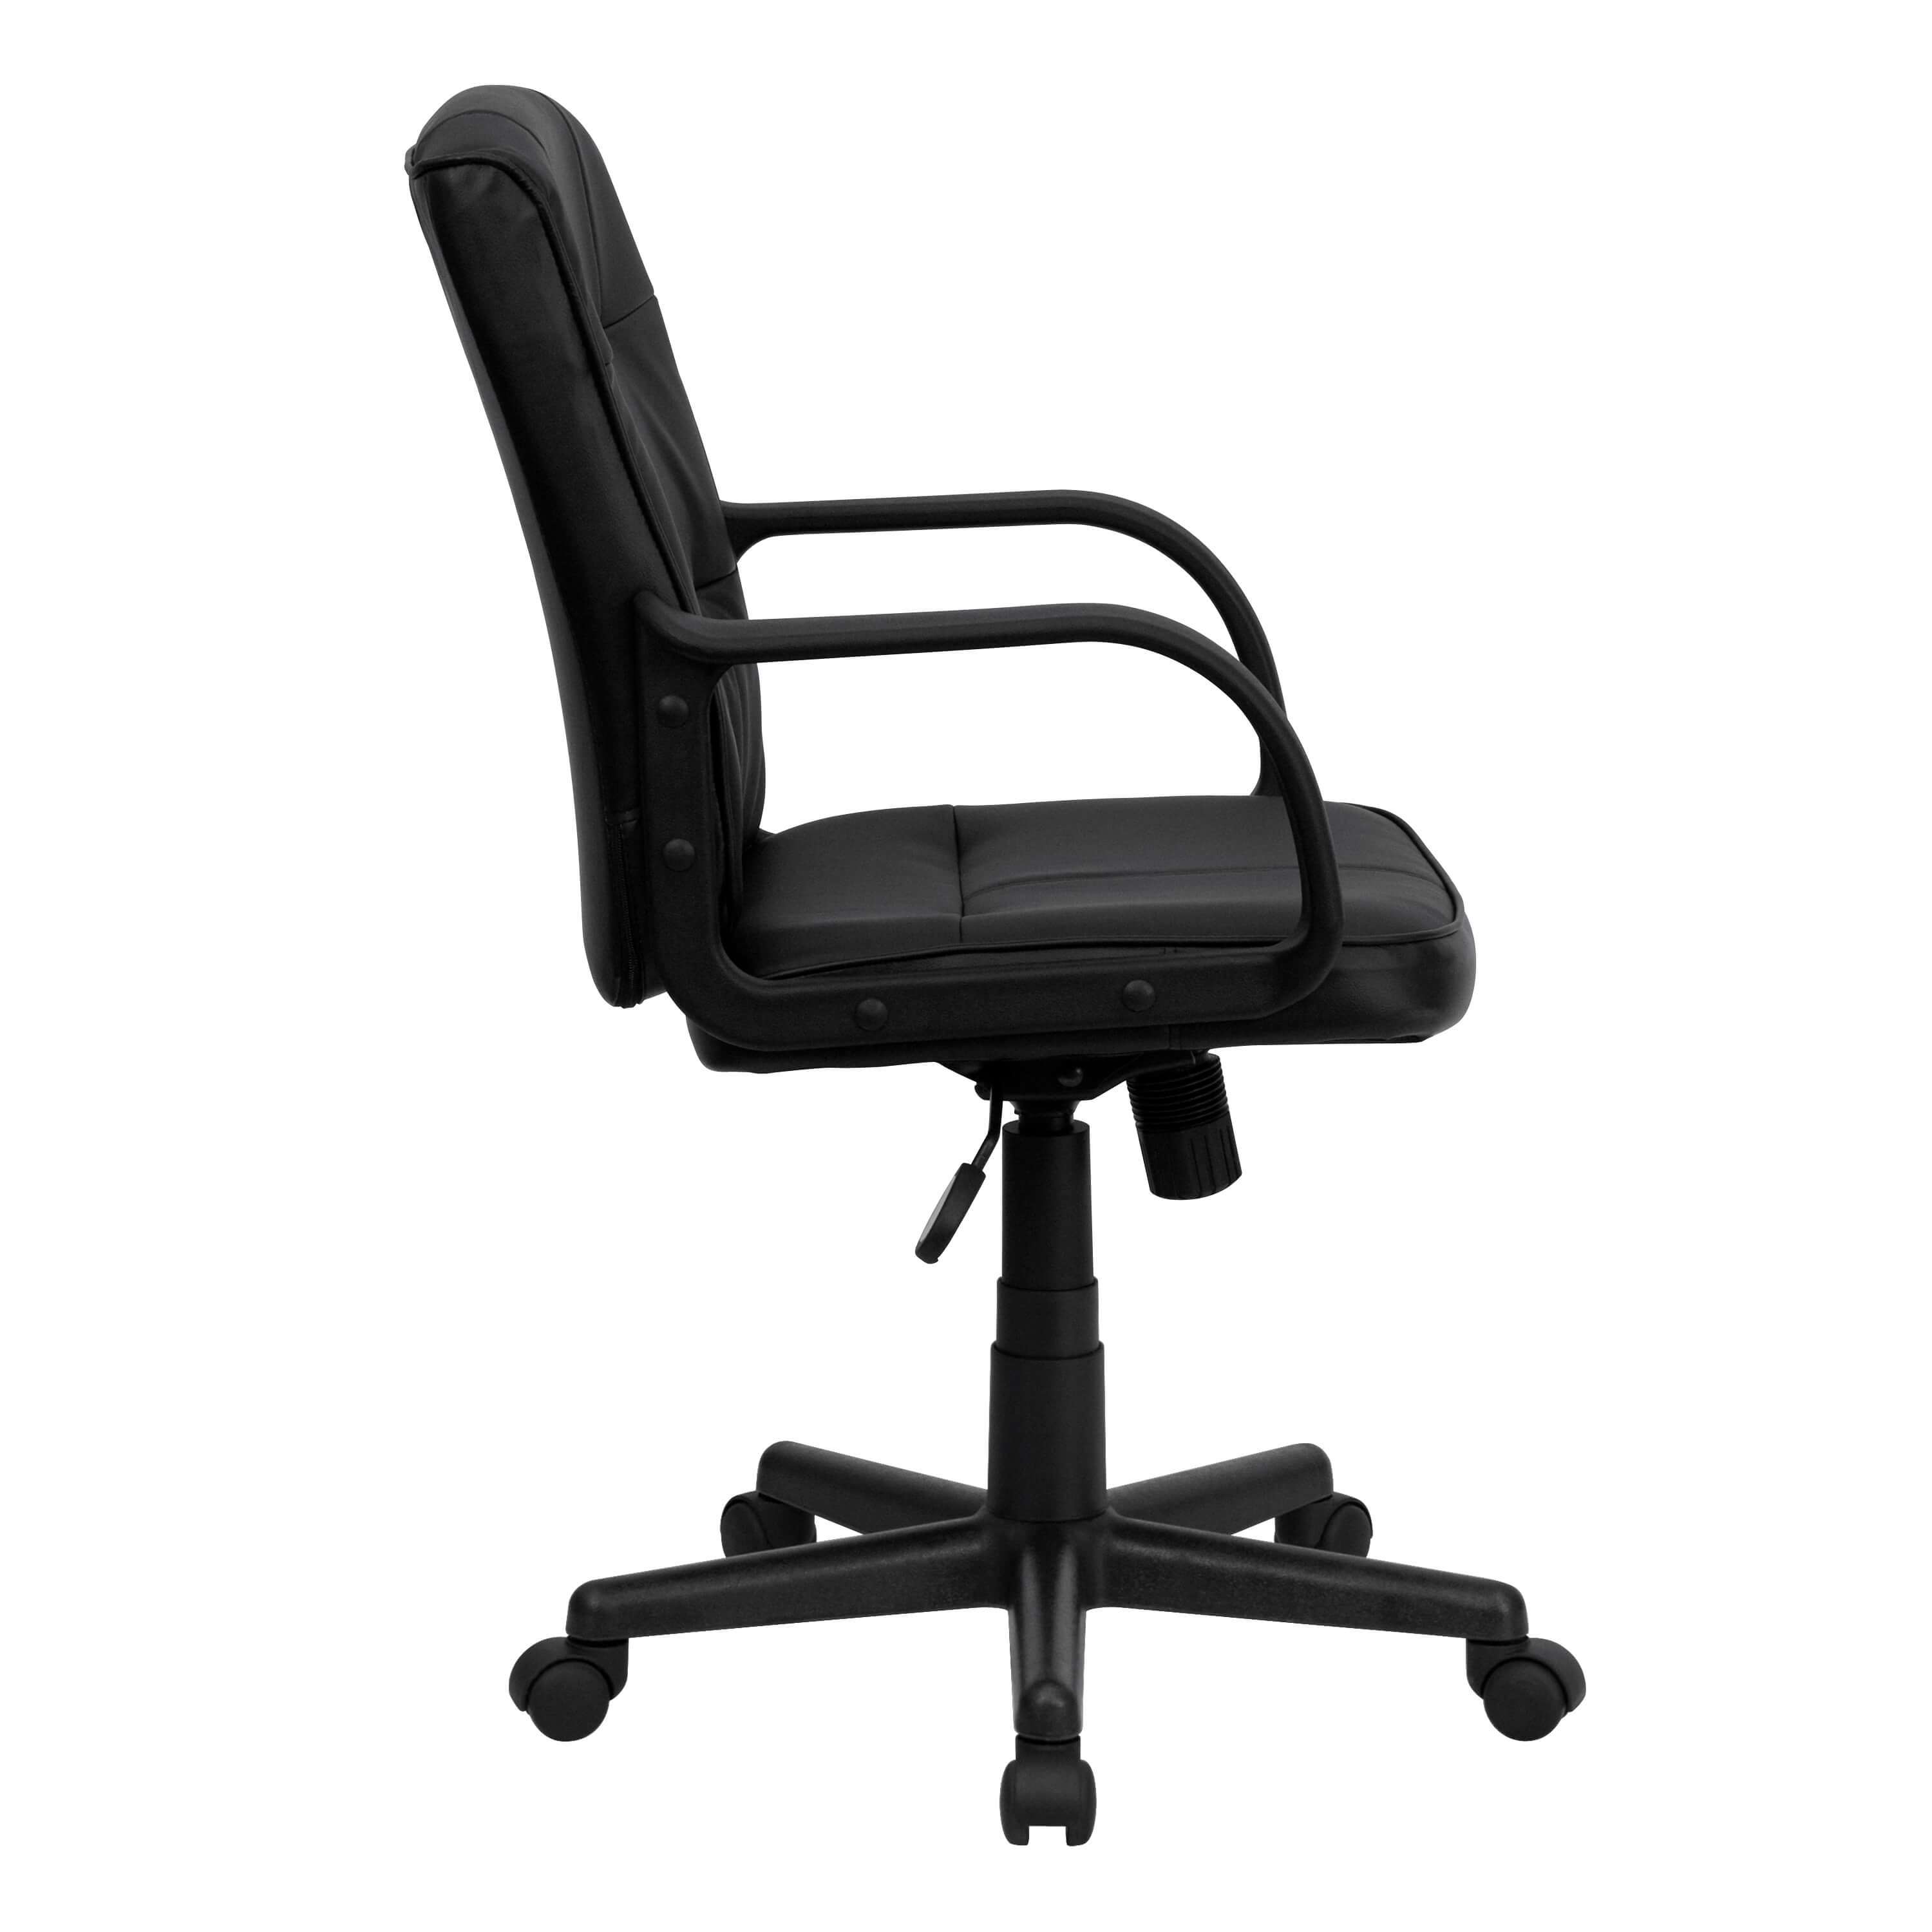 Black leather office chair side view